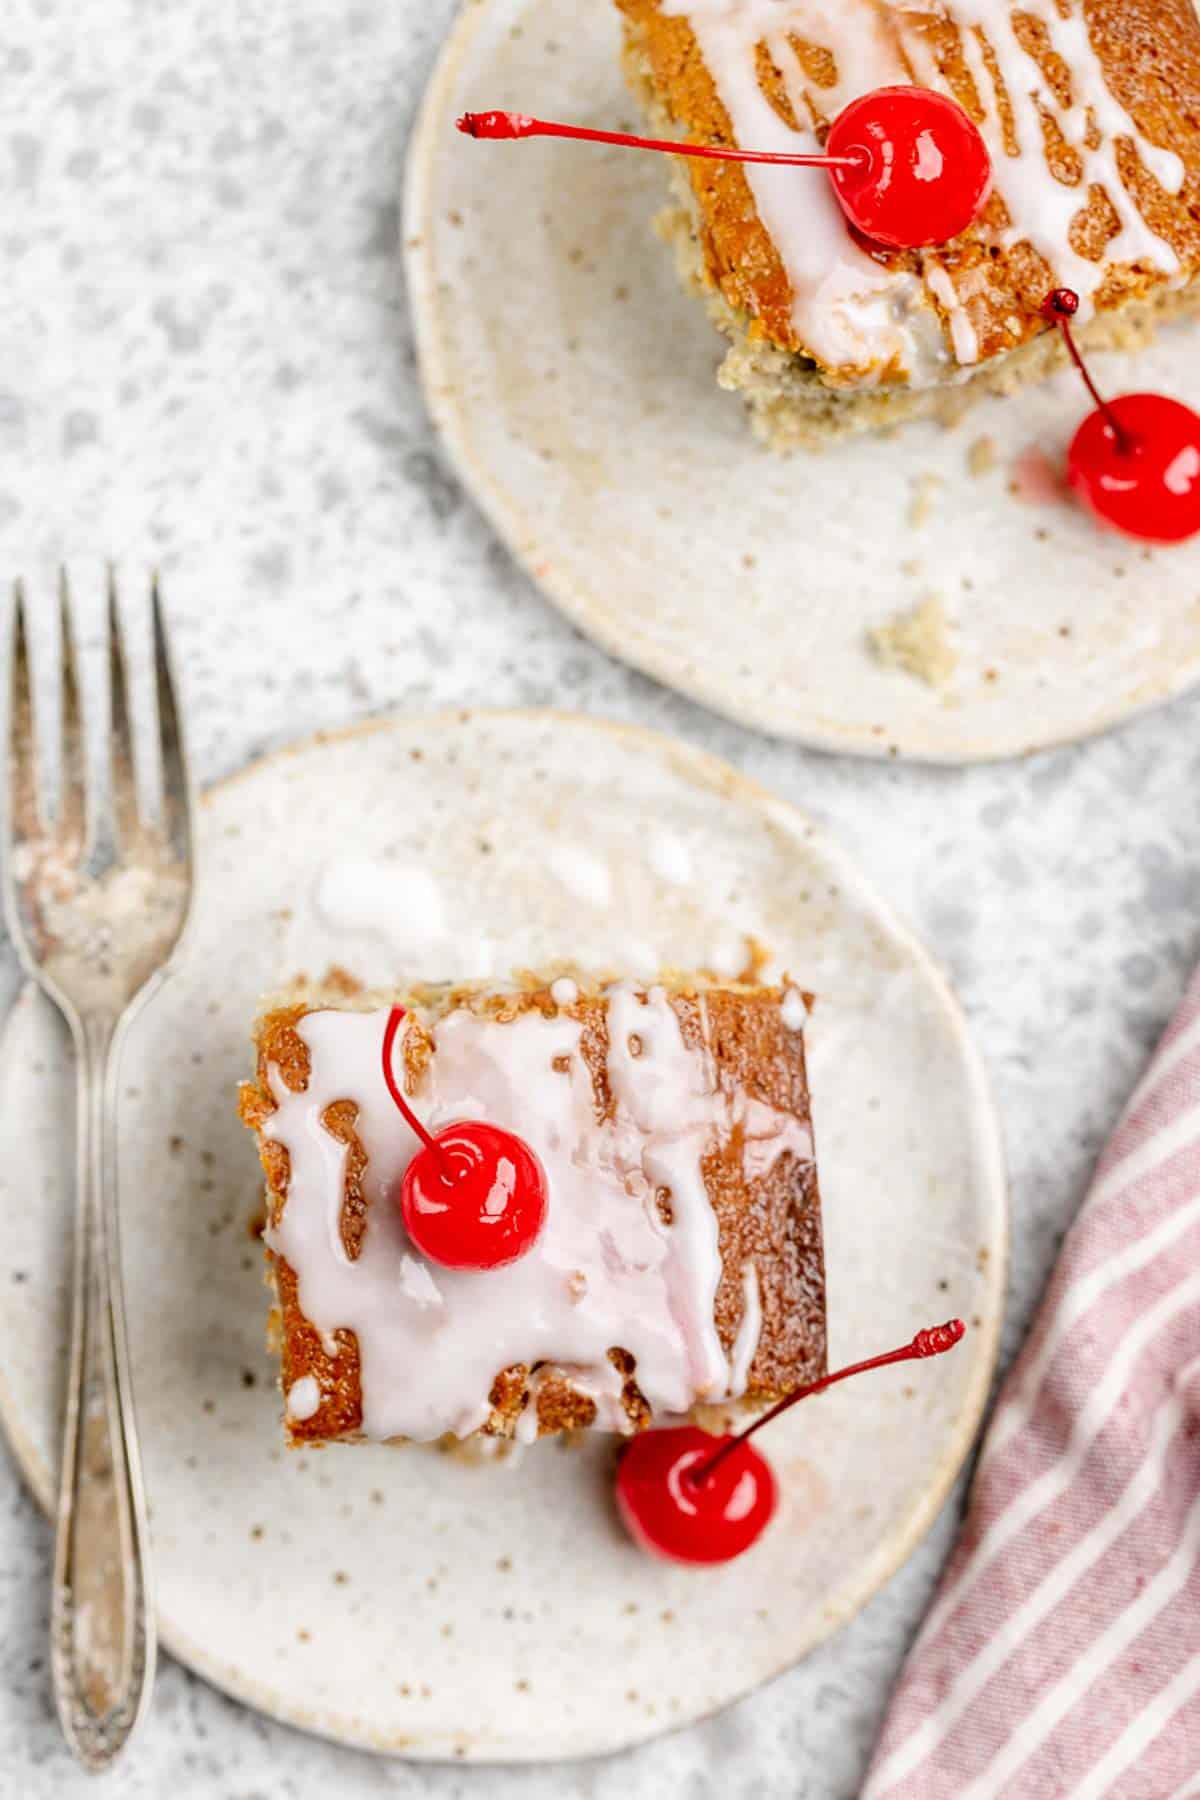 Overhead view of sour cream cherry coffee cake slices on plates.